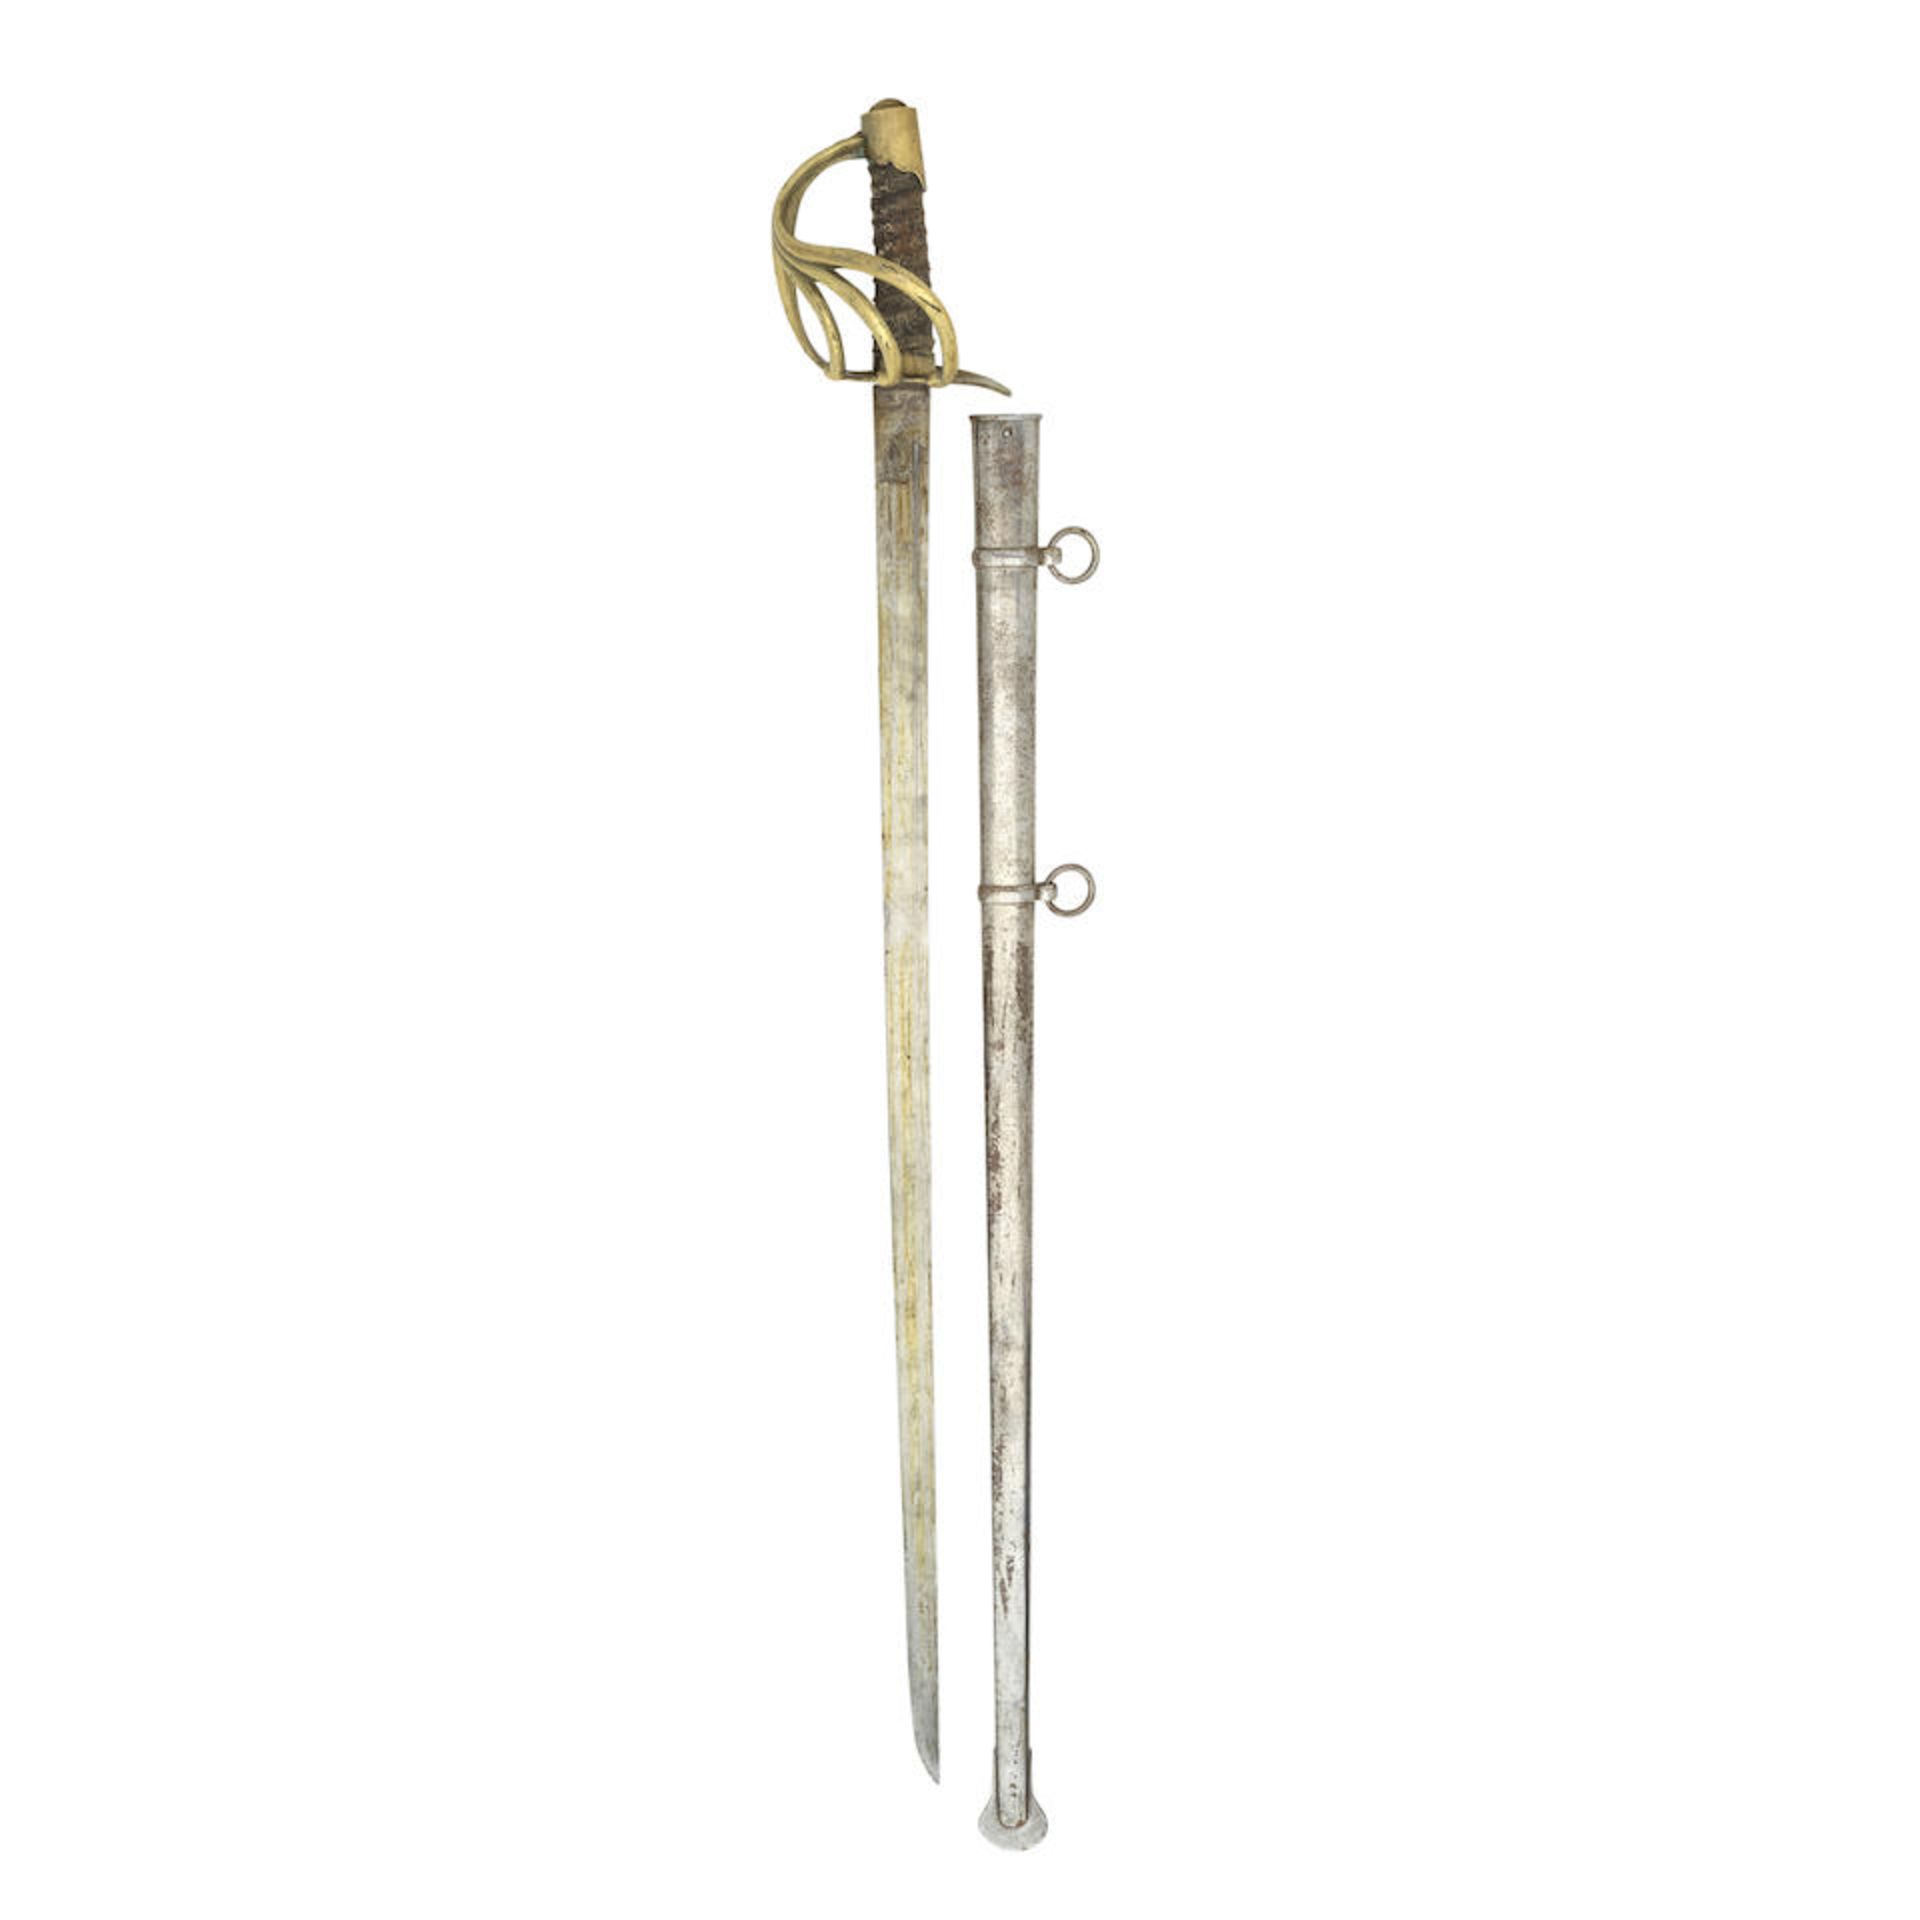 A French ANXI Cuirassier's Sword